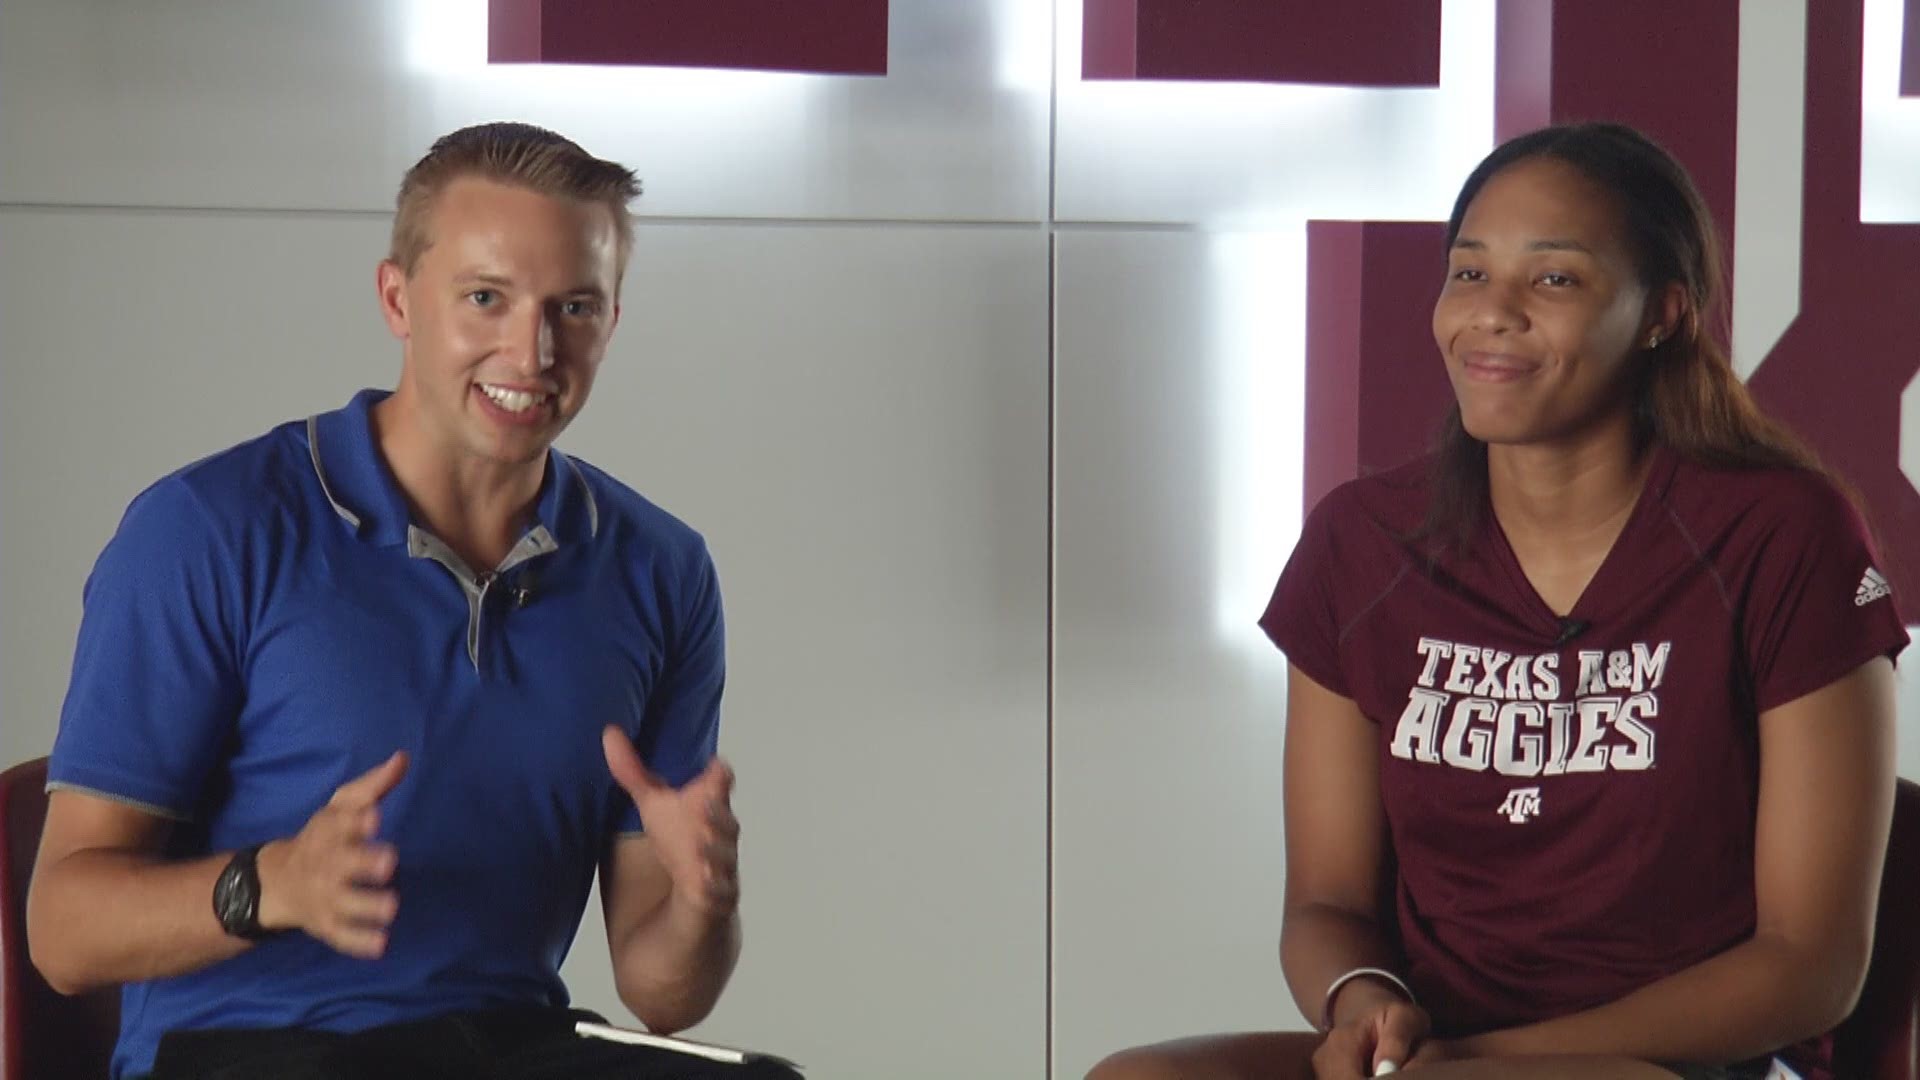 KAGS sports reporter Mike Lucas sits down with Texas A&M women's basketball forward N'dea Jones about the summer workouts and expectations for the upcoming season.